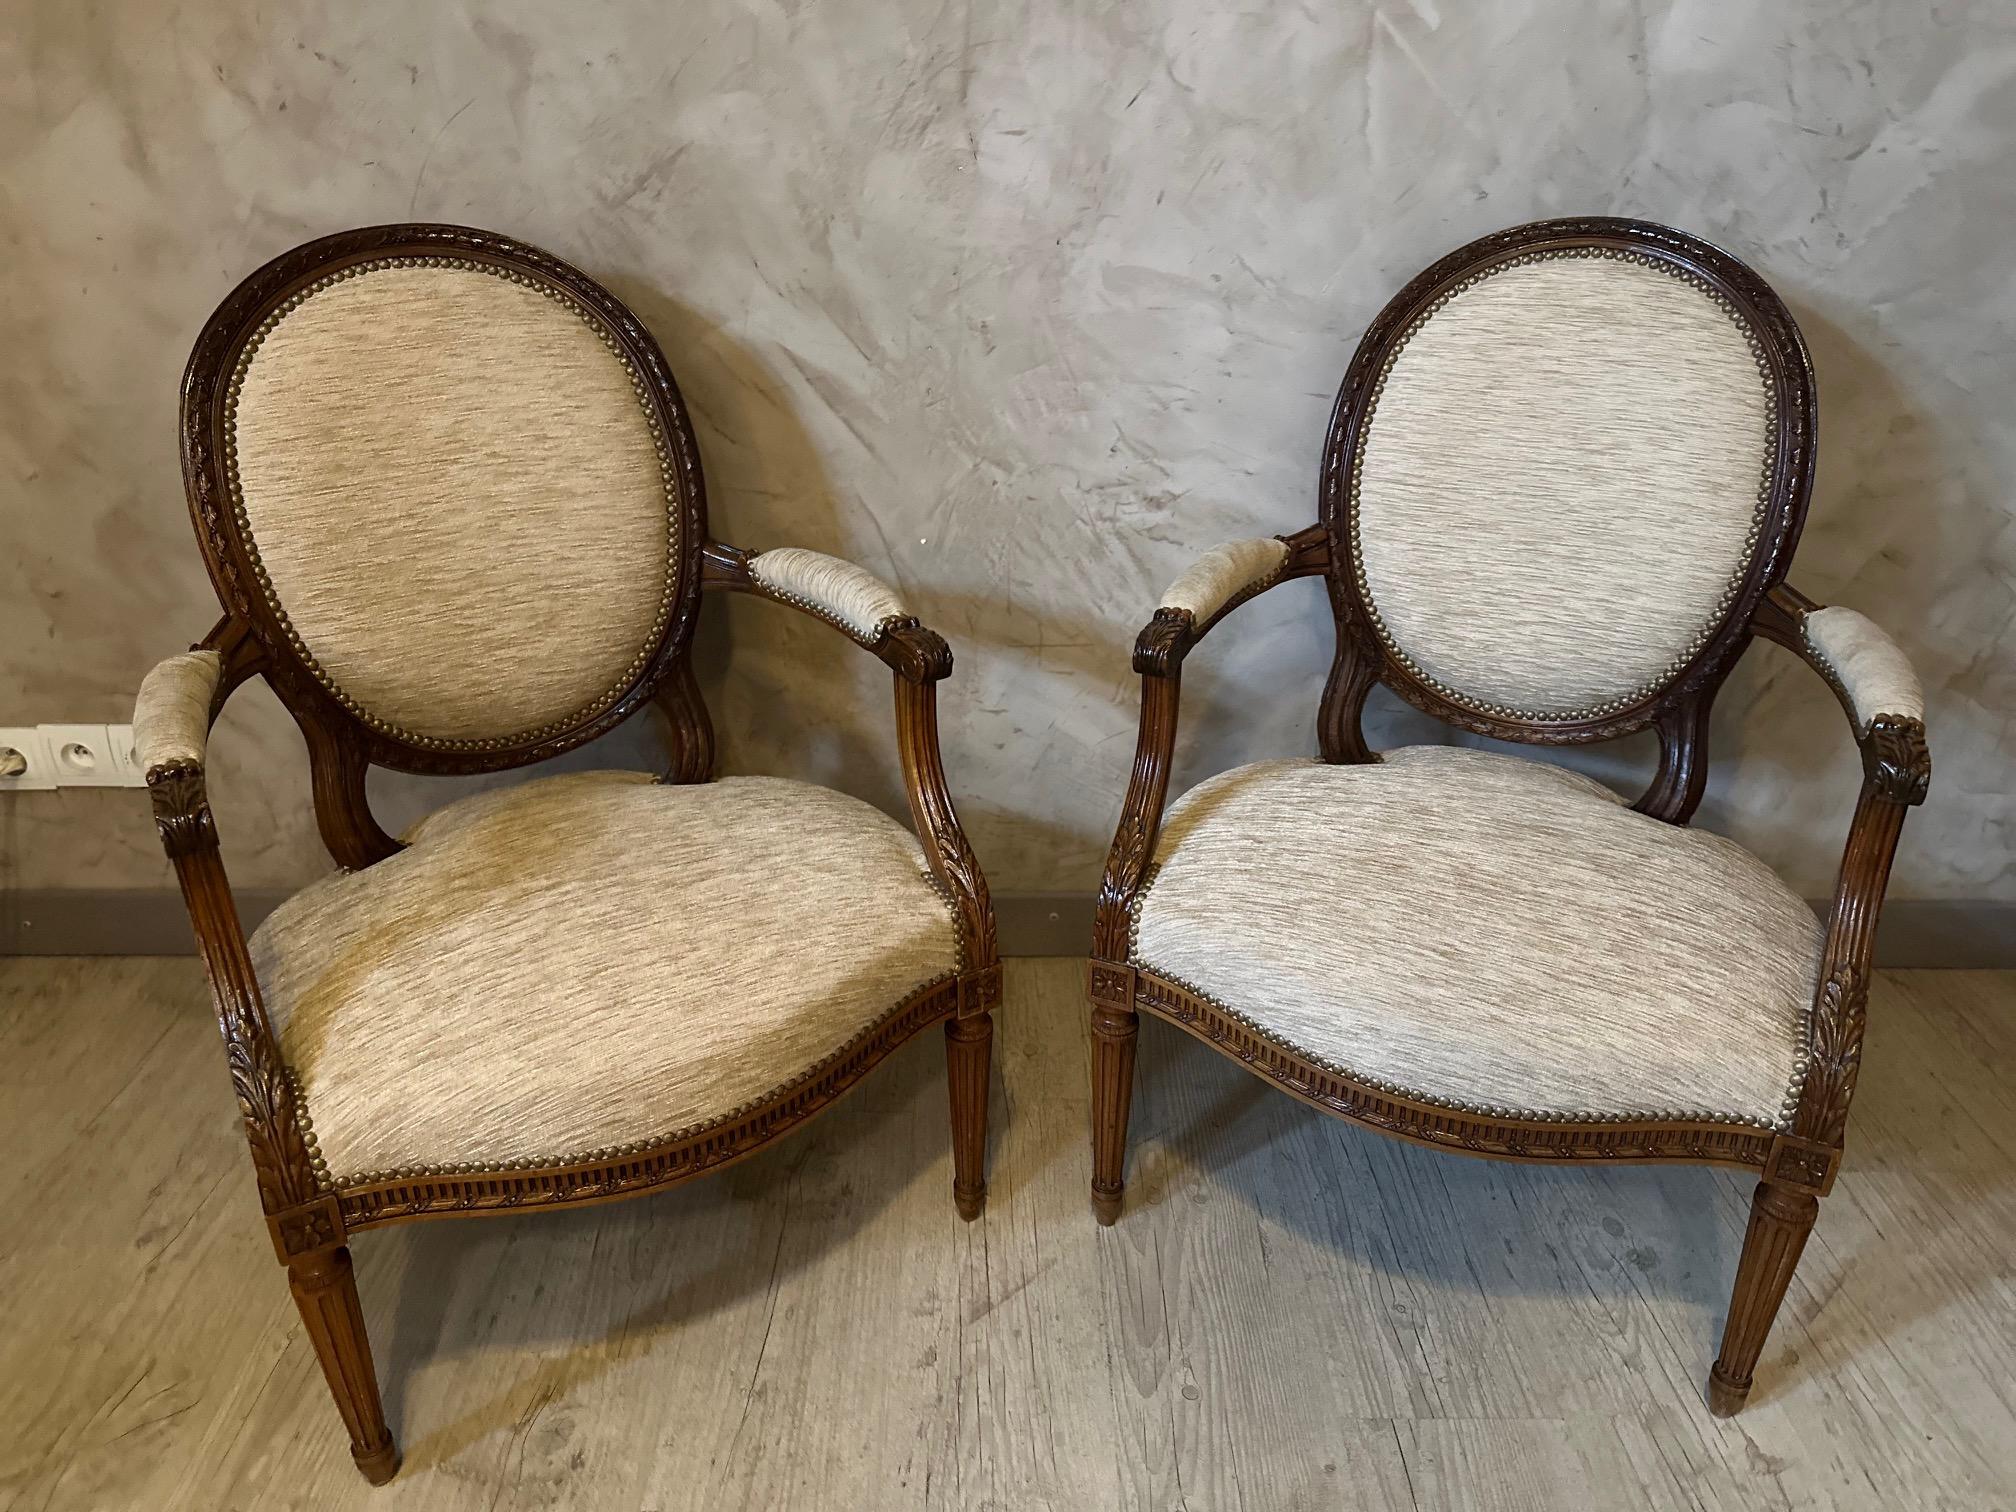 Beautiful pair of Louis XVI style armchairs in very good condition dating from the beginning of the 20th century.
Pretty mottled beige fabric with a bronze stud finish.
Beautiful quality and very comfortable.